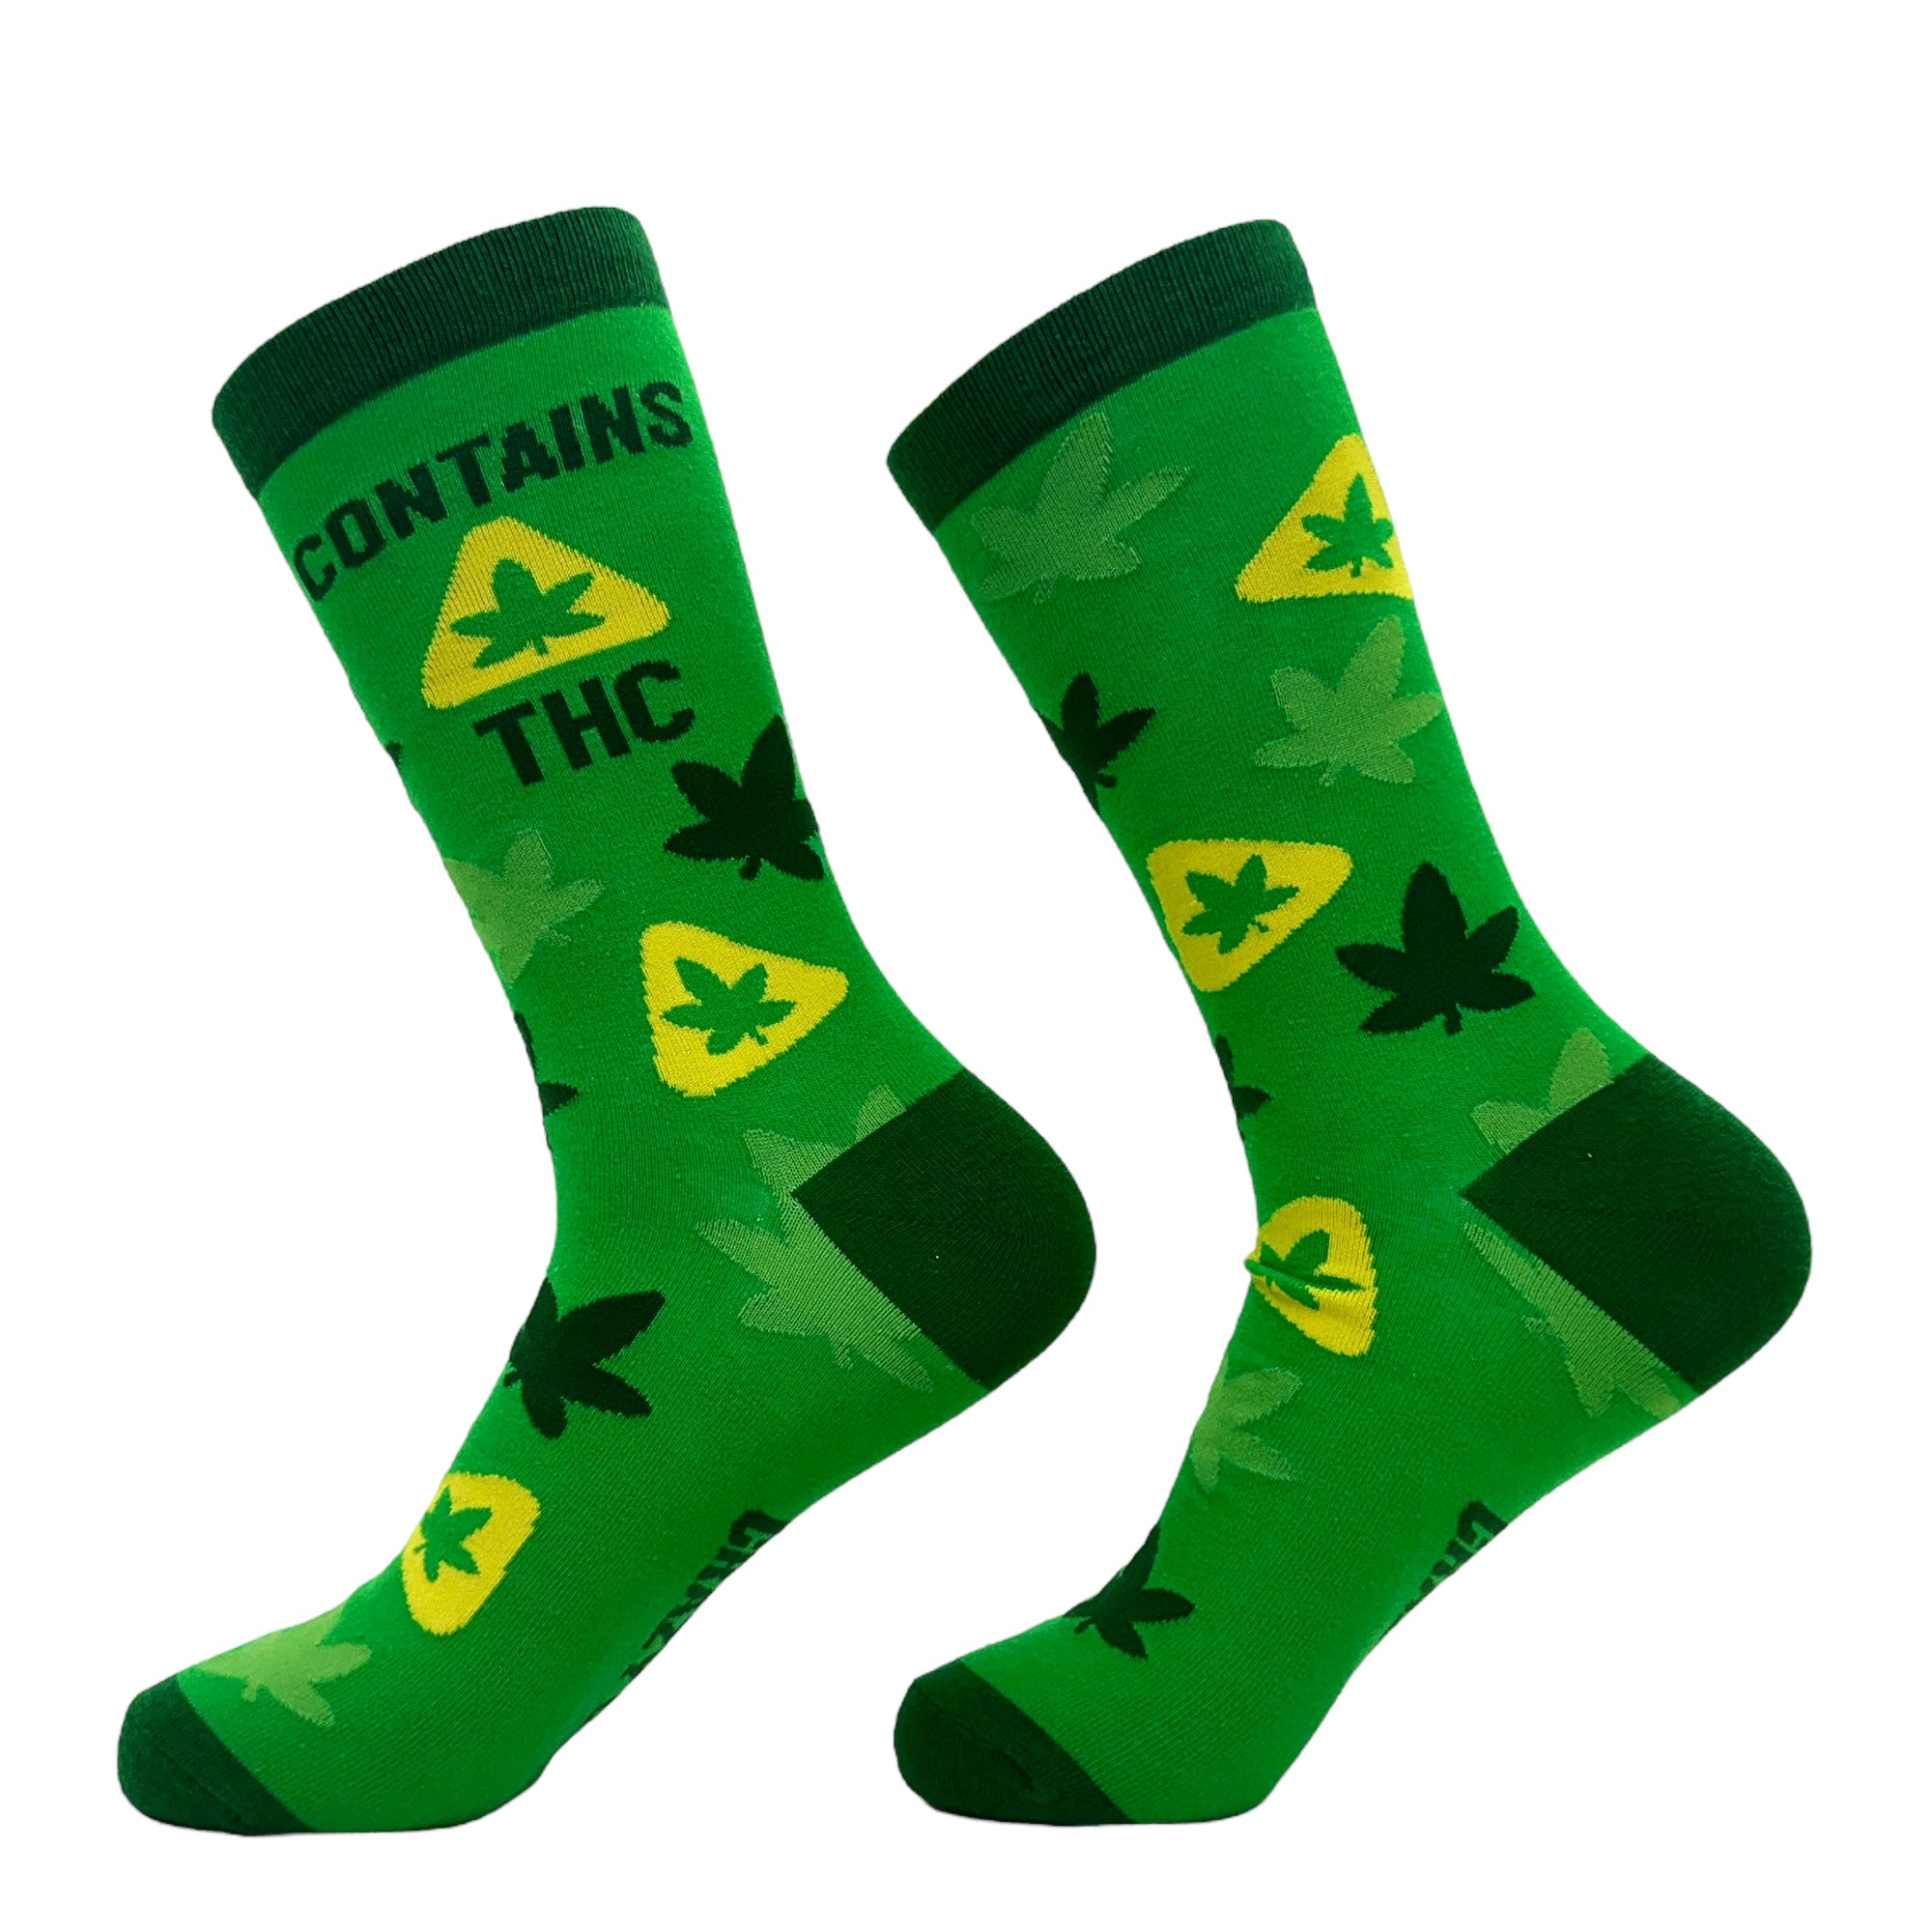 Funny Green - Contains THC Men's Contains THC Sock Nerdy 420 sarcastic Tee